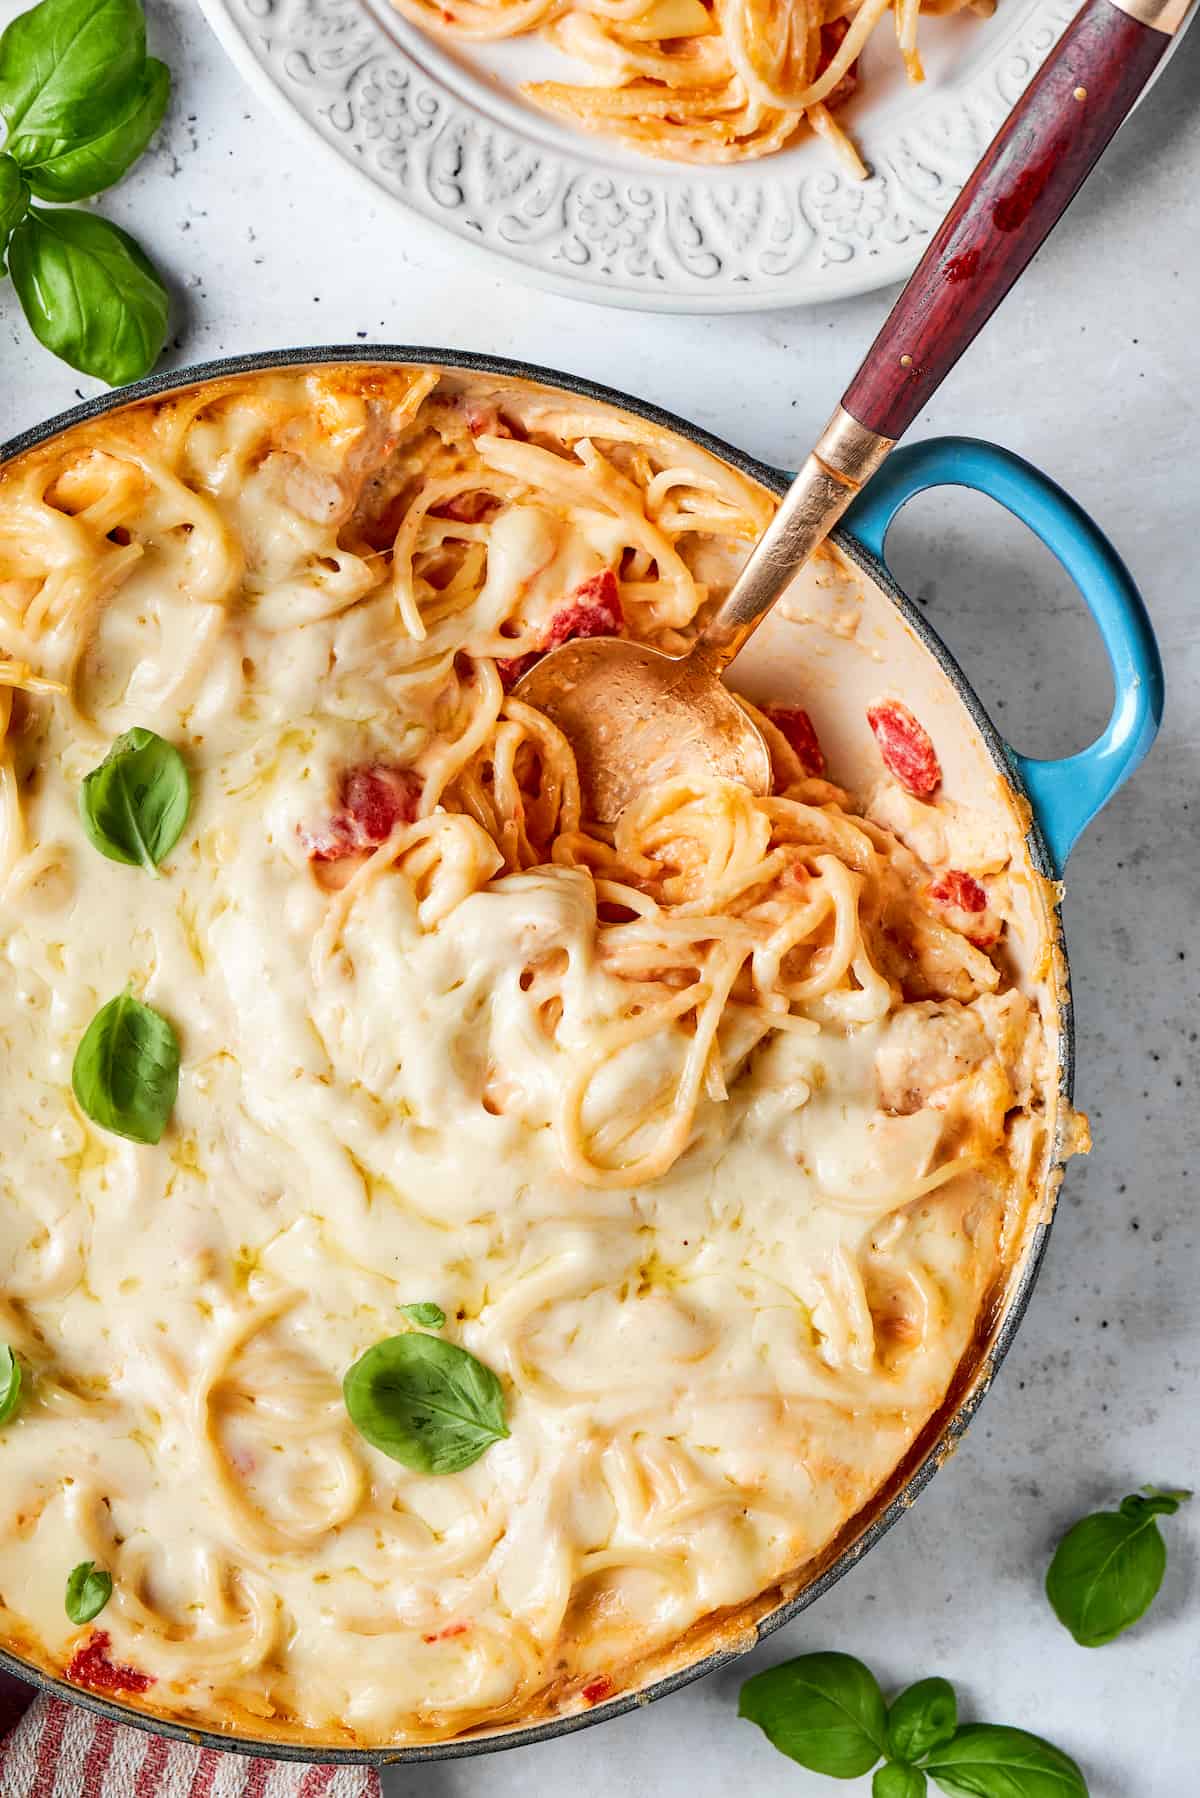 Spaghetti baked in a casserole dish with a layer of melted mozzarella cheese on top.